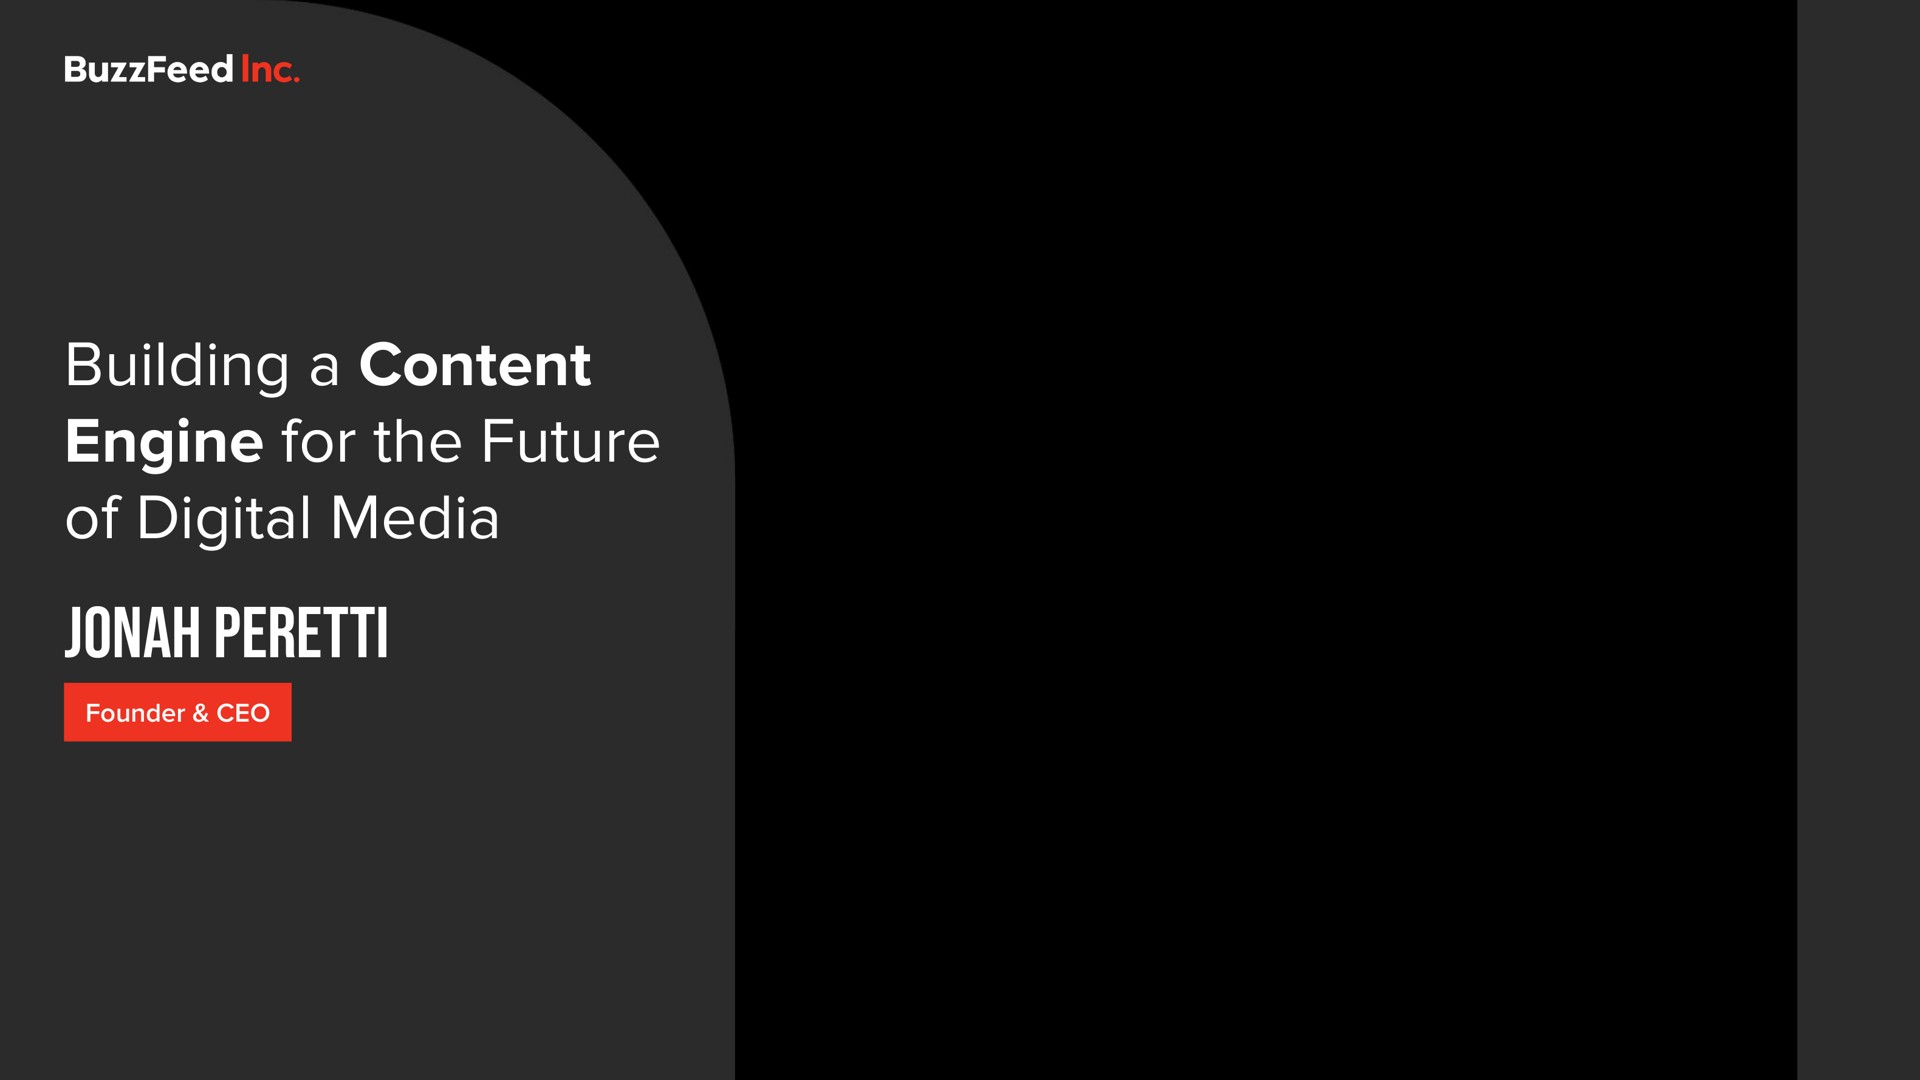 building a content engine for the future of digital media | BuzzFeed